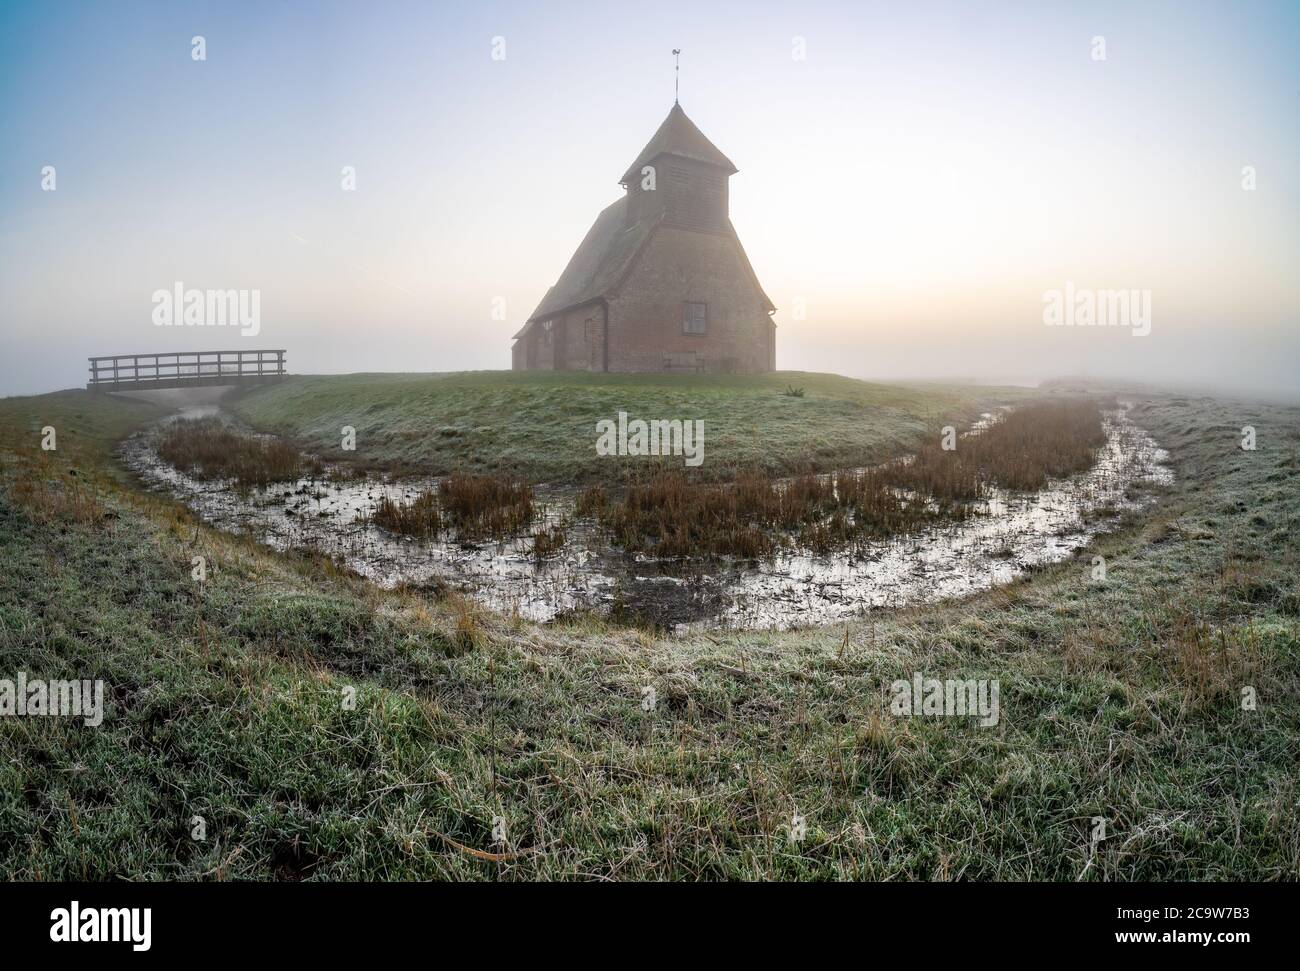 St Thomas à Becket Church in Fairfield at sunrise after the fog moved in. Panoramic image. Stock Photo